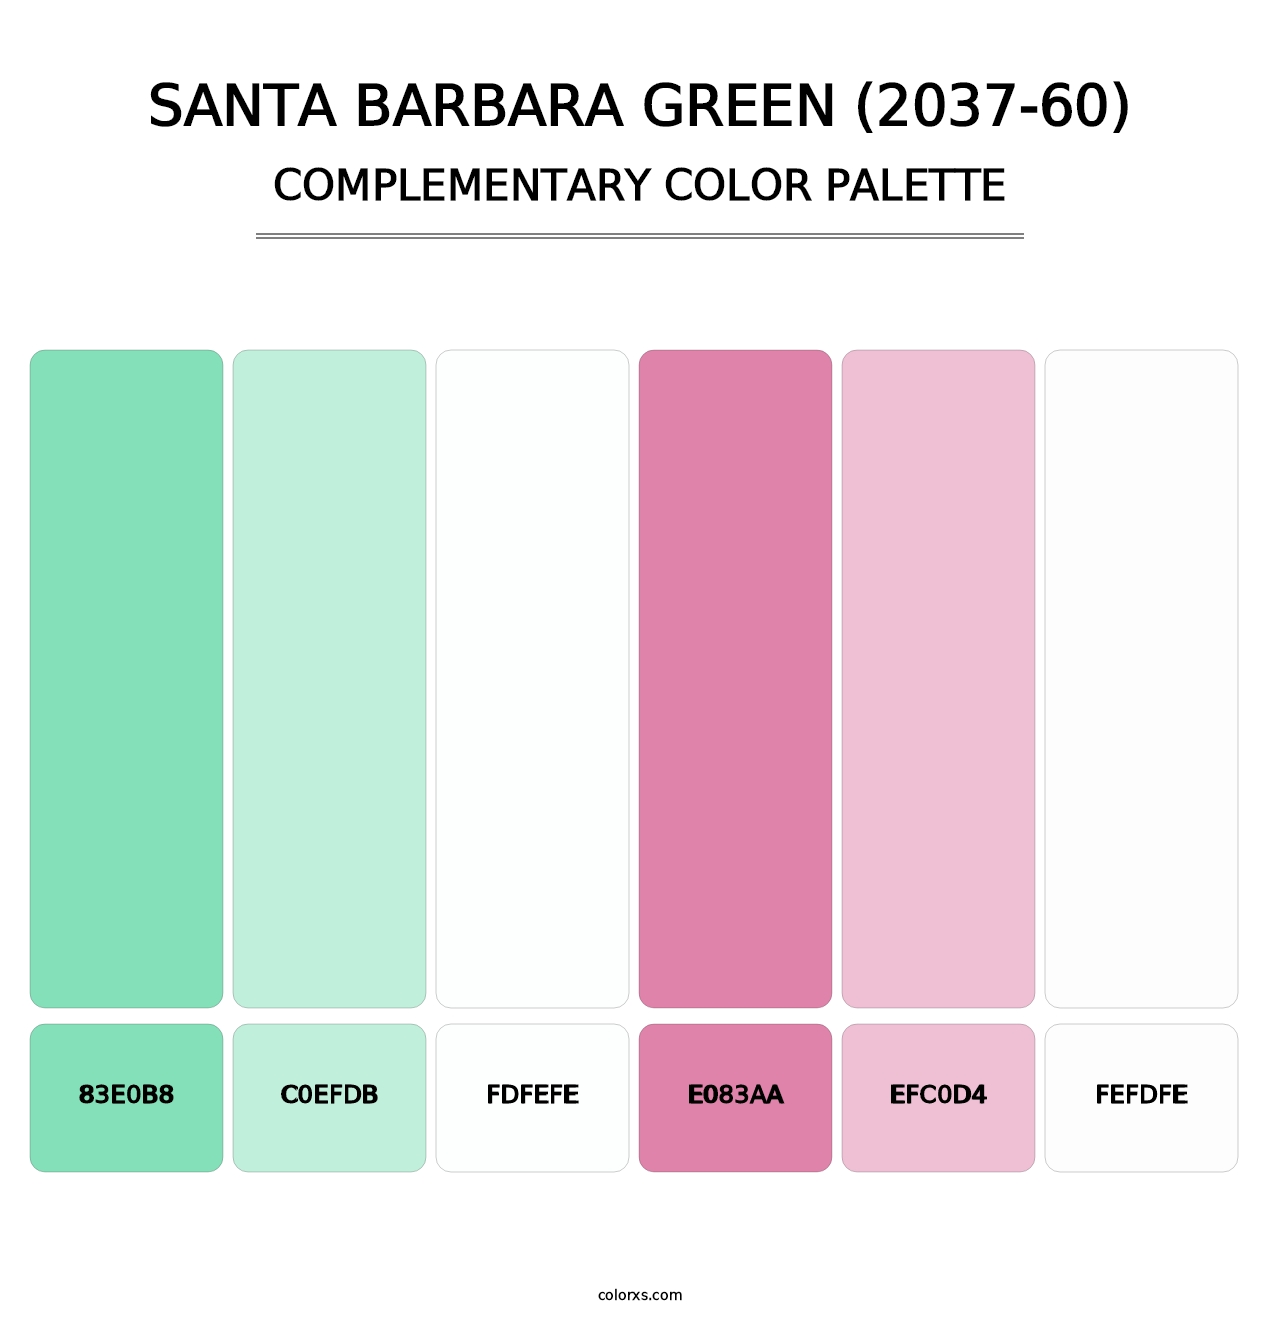 Santa Barbara Green (2037-60) - Complementary Color Palette